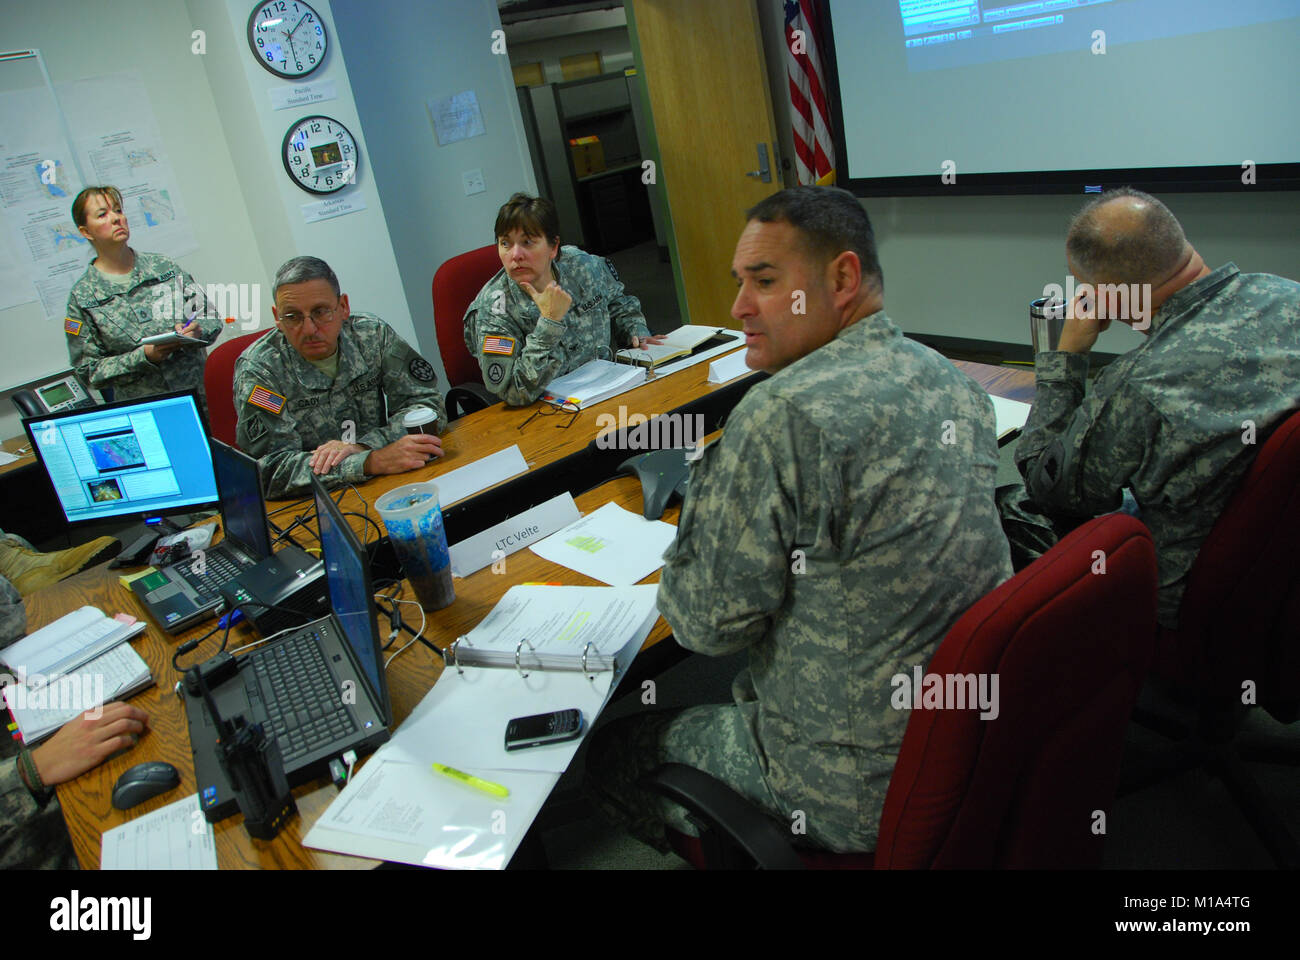 California Army National Guard leaders from the 115th Regional Support Group, seated from left to right, Command Sgt. Maj. Randall Cady, Col. Rene Horton, commander, Lt. Col. Kurt Velte, executive officer, and Col. Keith Tresh, incoming commander, sit in the Emergency Operations Center in Roseville and get the latest updates coming in from the field at 2:30 a.m., Jan. 6, 2012, during the 115th Regional Support Group's Emergency Deployment Readiness Exercise, which had 60 vehicles and 217 troops moving their wheeled assets around the state in response to a earthquake scenario. The troops report Stock Photo